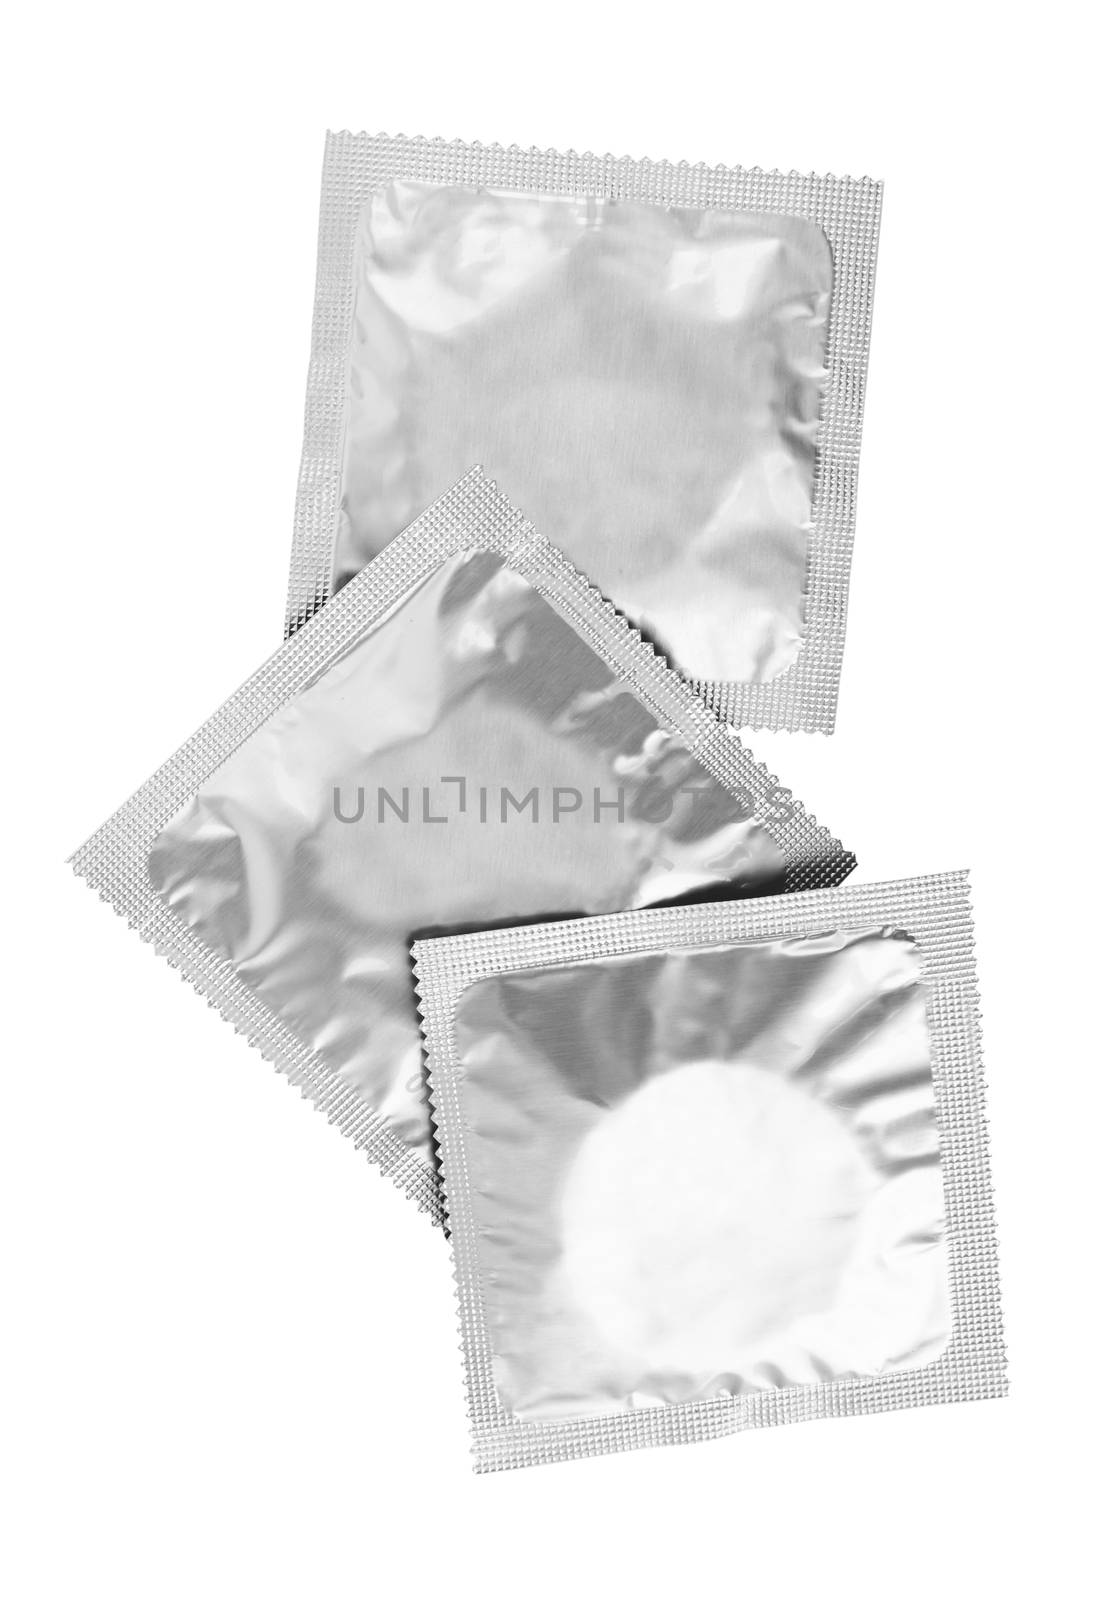 Condoms isolated on white a background